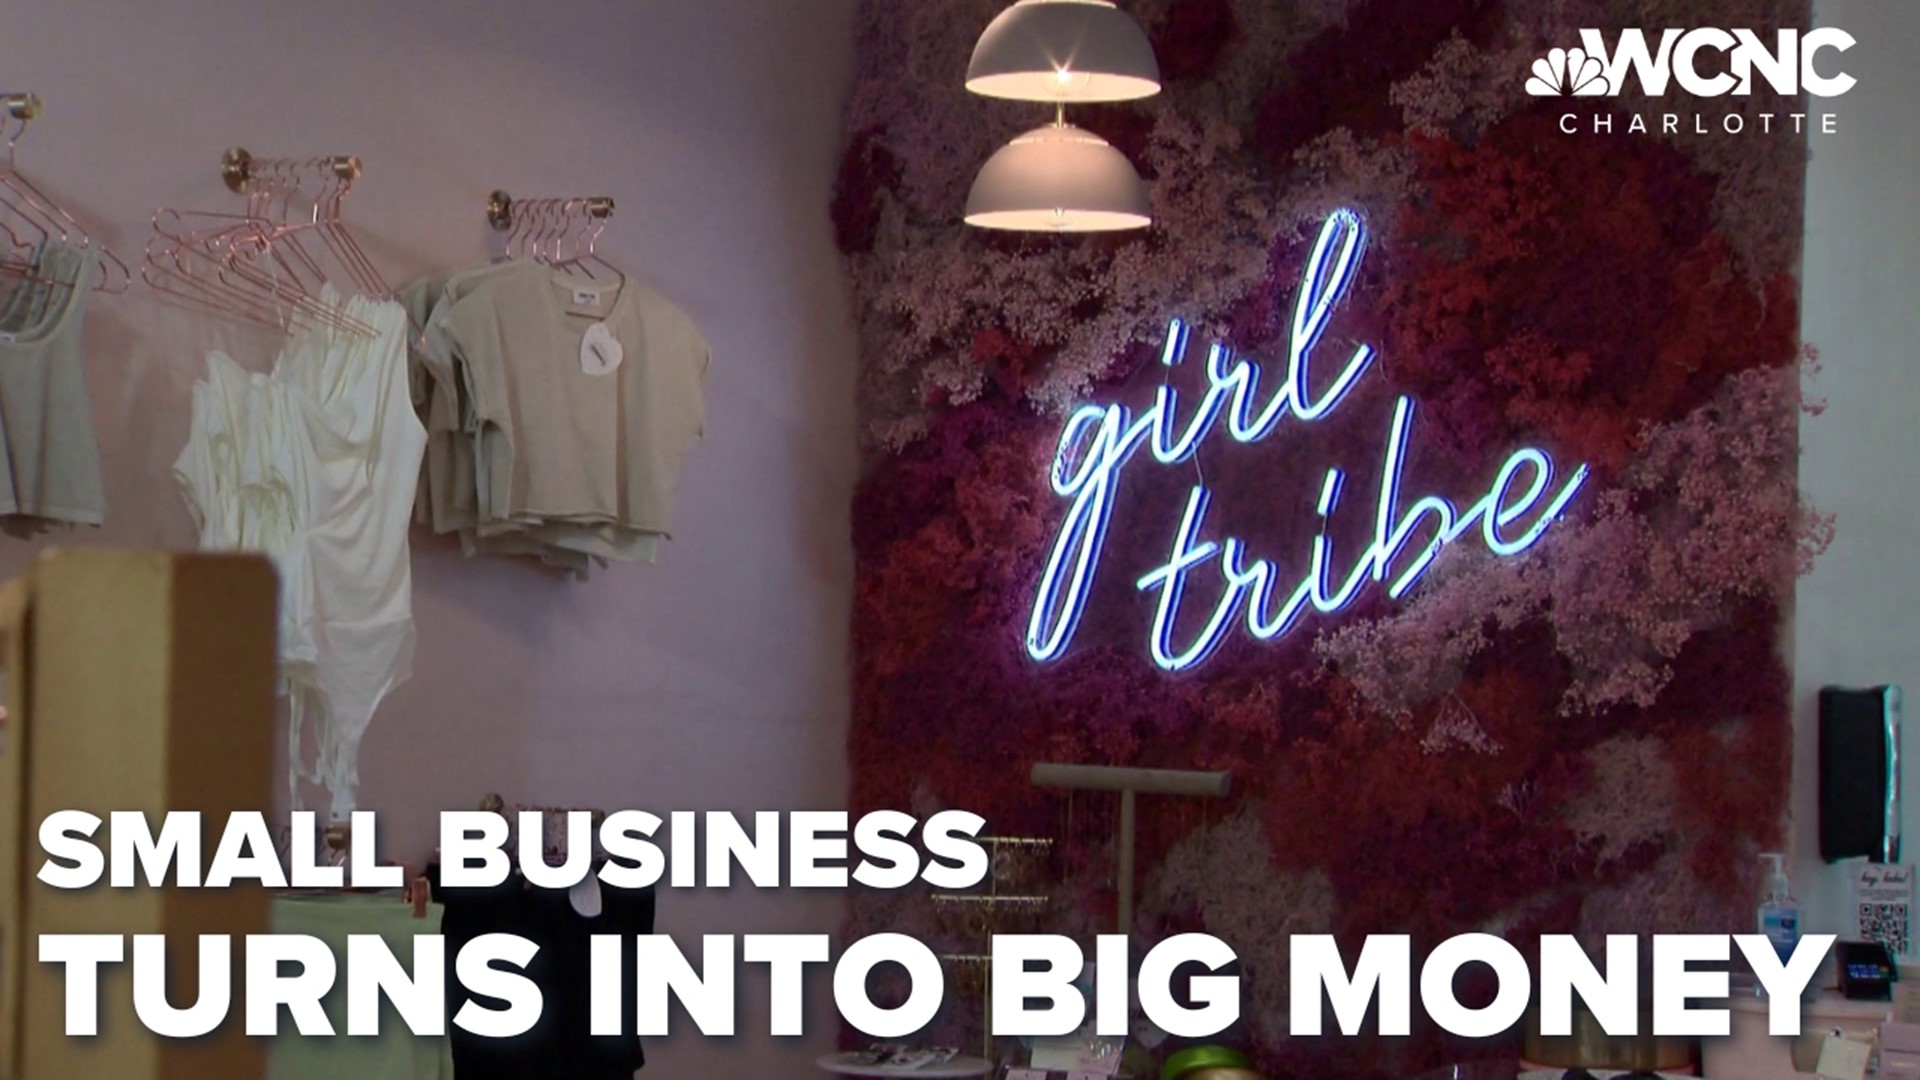 Girl Tribe is all about girl power and the business now employs 50 people.